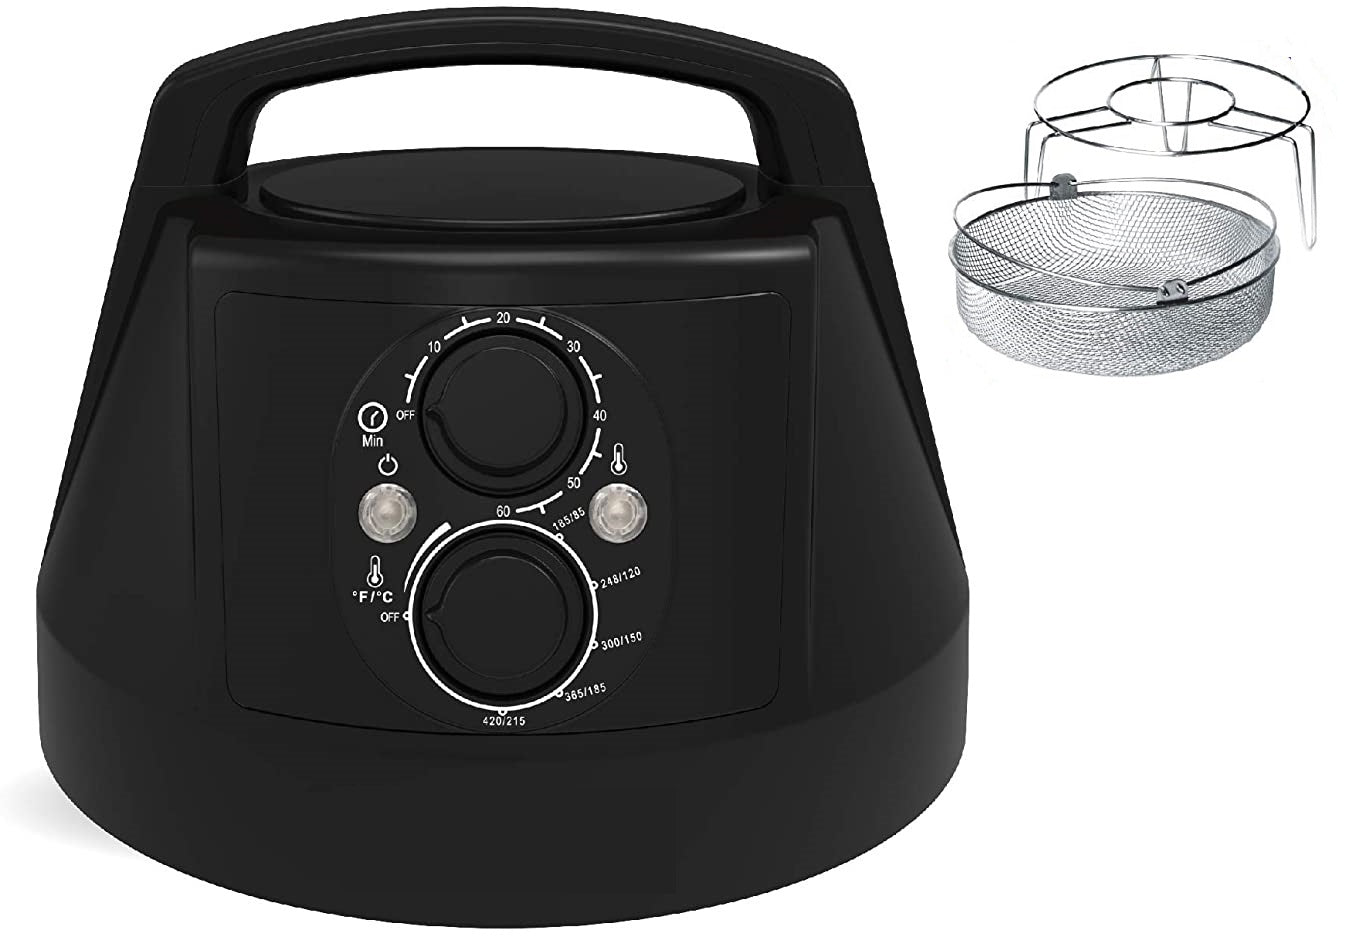 Instant Pot Air Fryer Lid - This Lid Turns Your Instant Pot into Air Fryer!